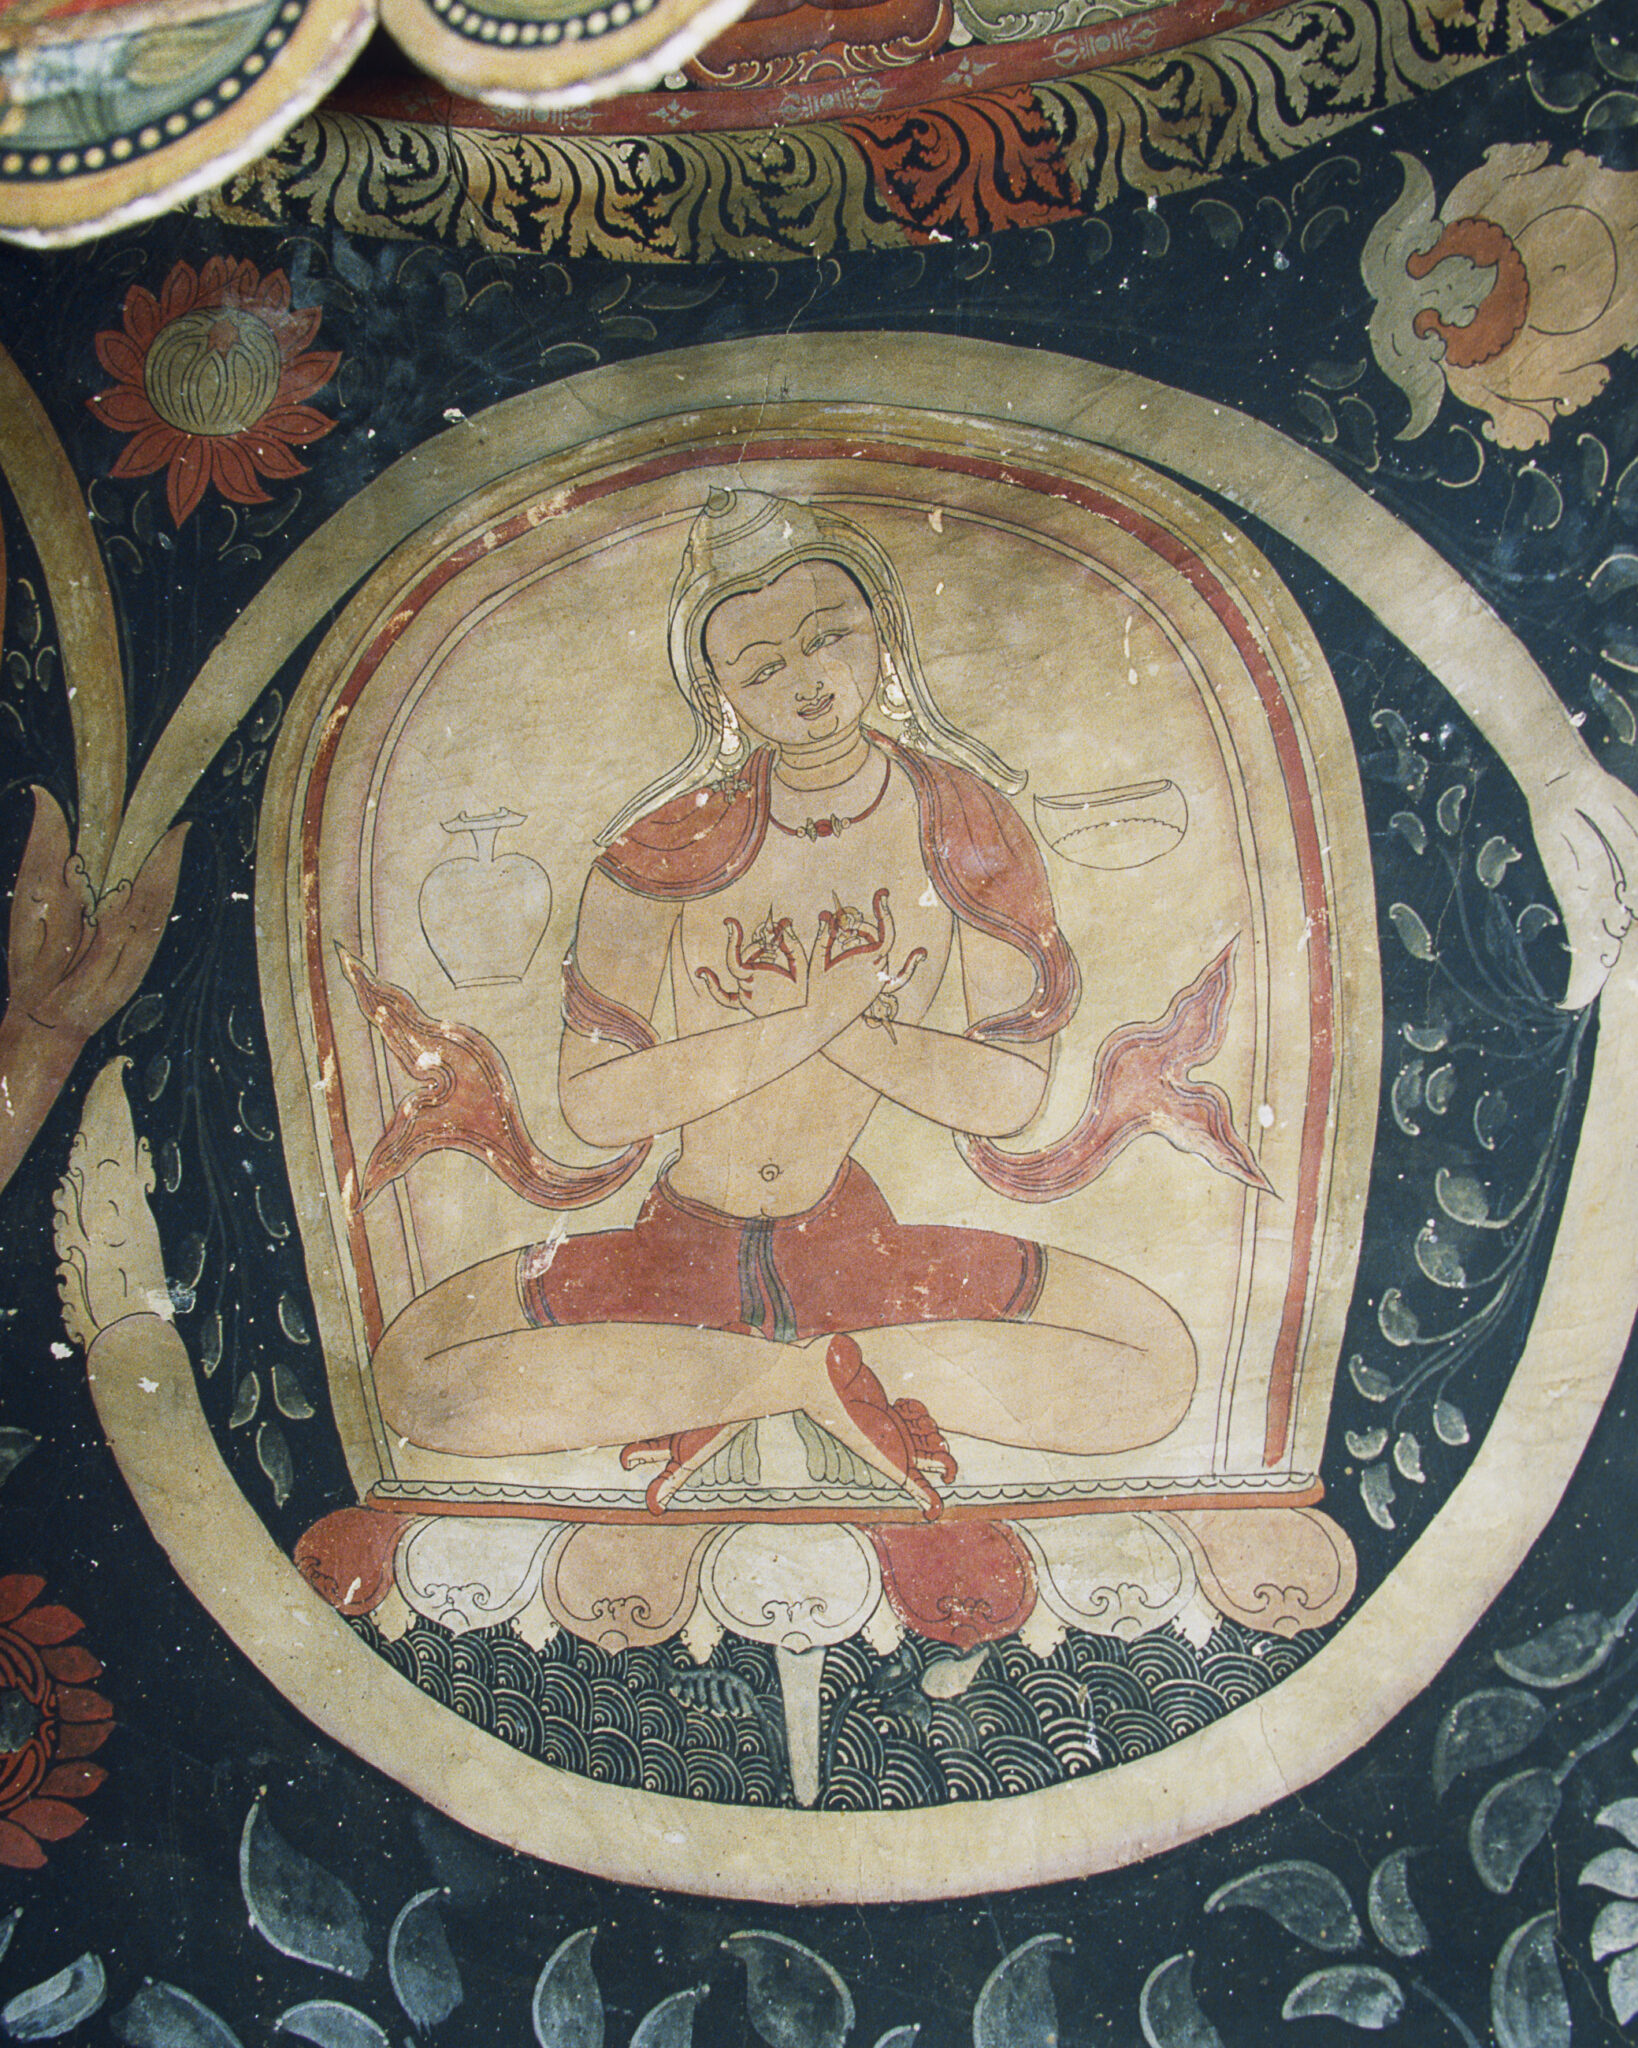 Seated holy man wearing orange dhoti and sash with hands posed in mudras at chest